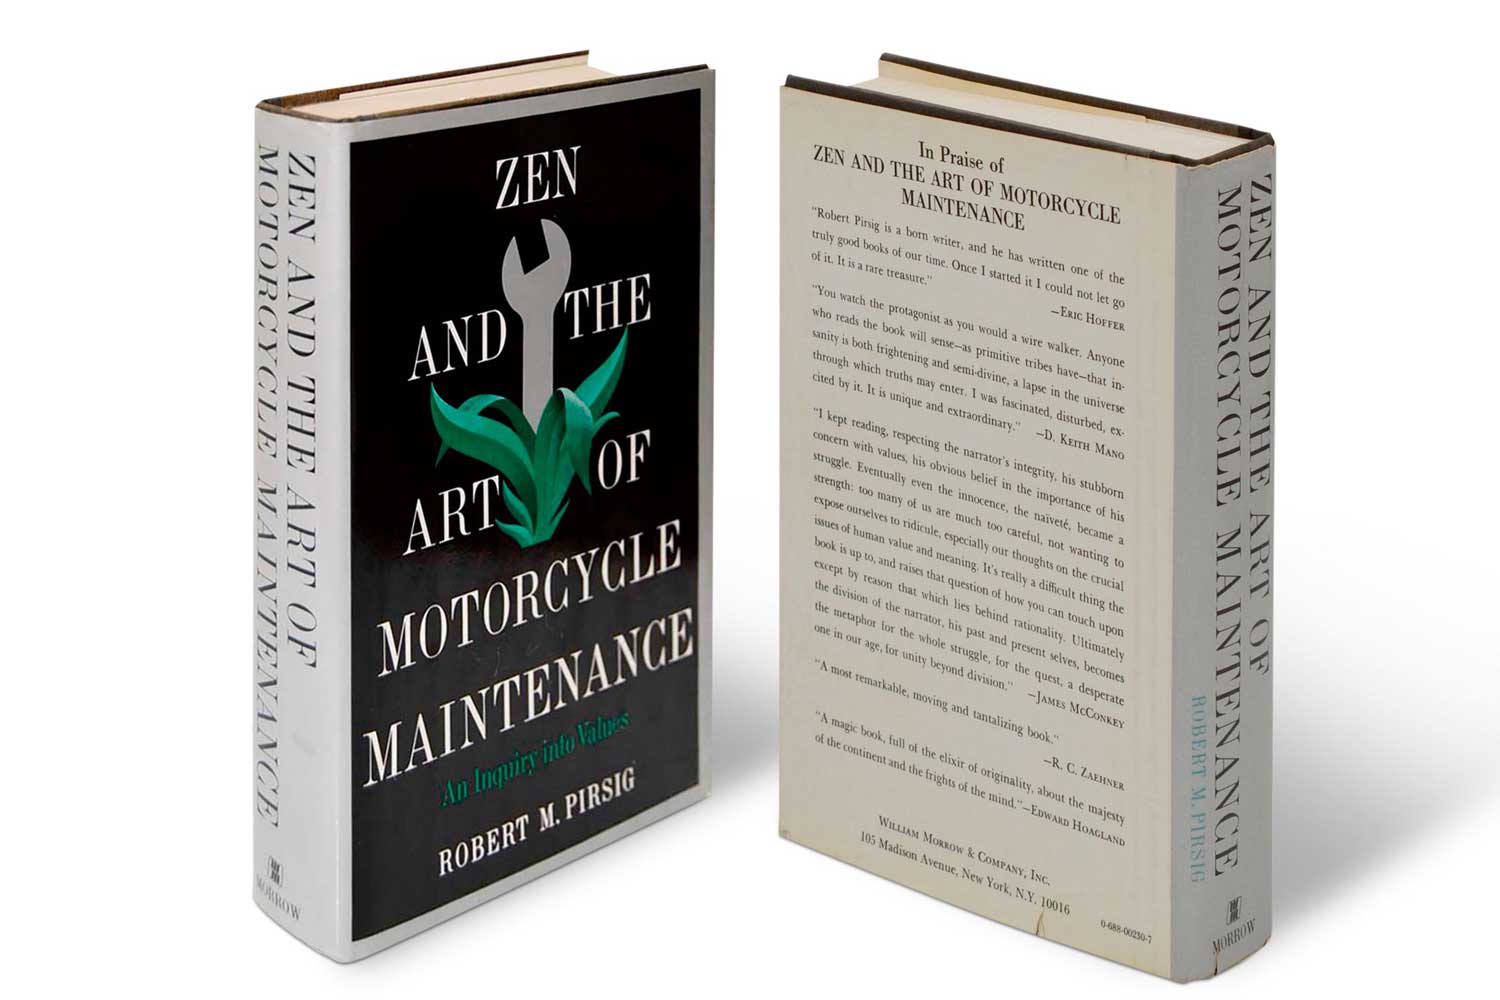 Zen and the Art of Motorcycle Maintenance: An Inquiry into Values by Robert M. Pirsig